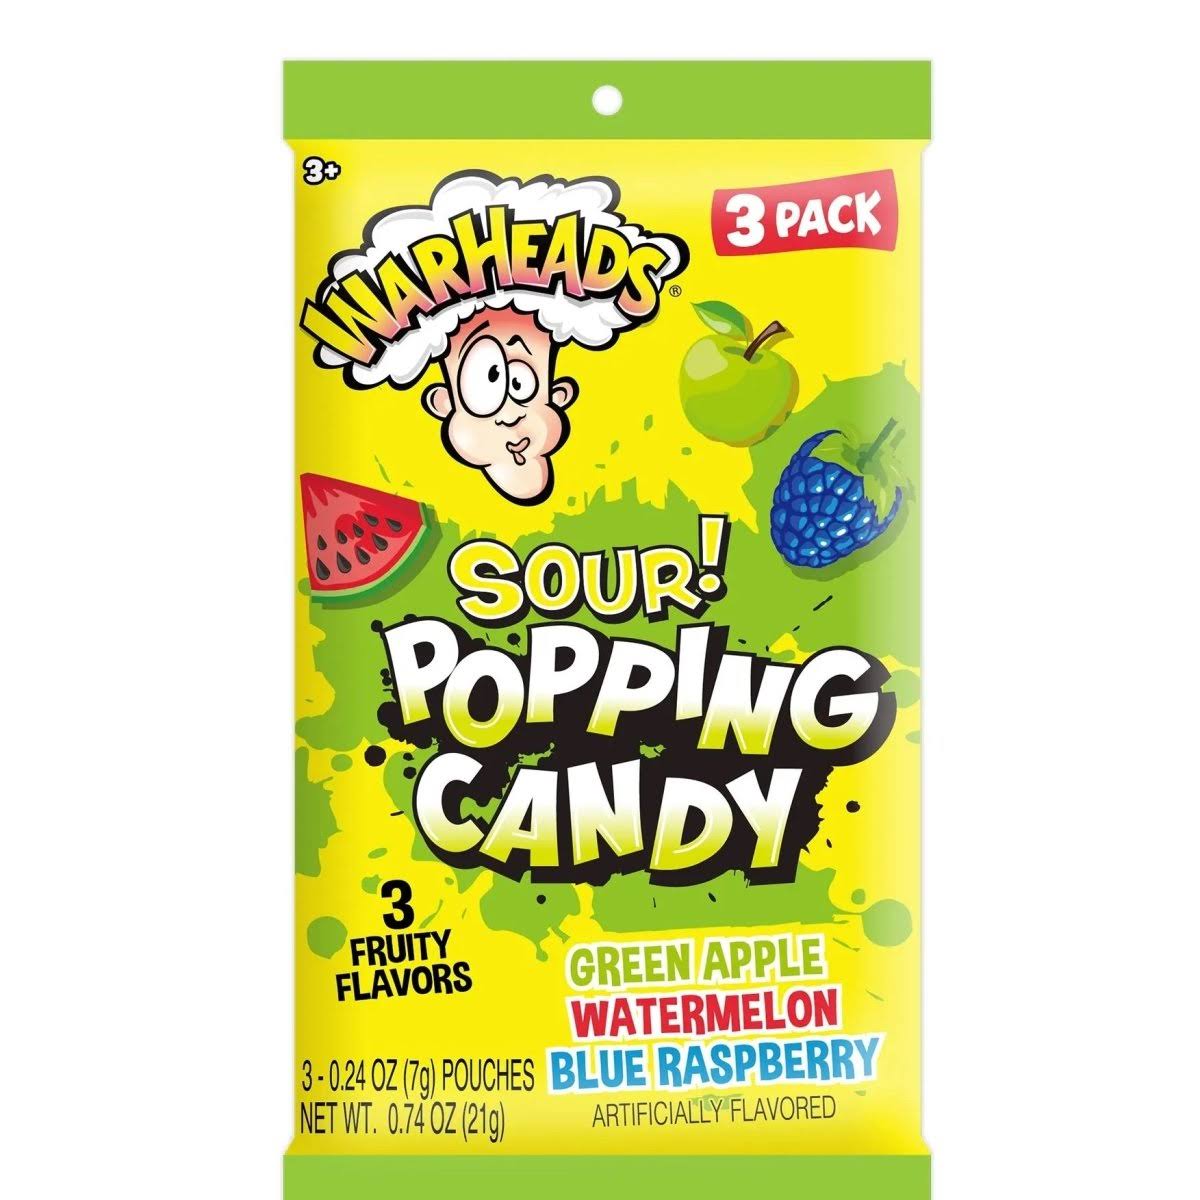 WARHEADS SOUR POPPING CANDY